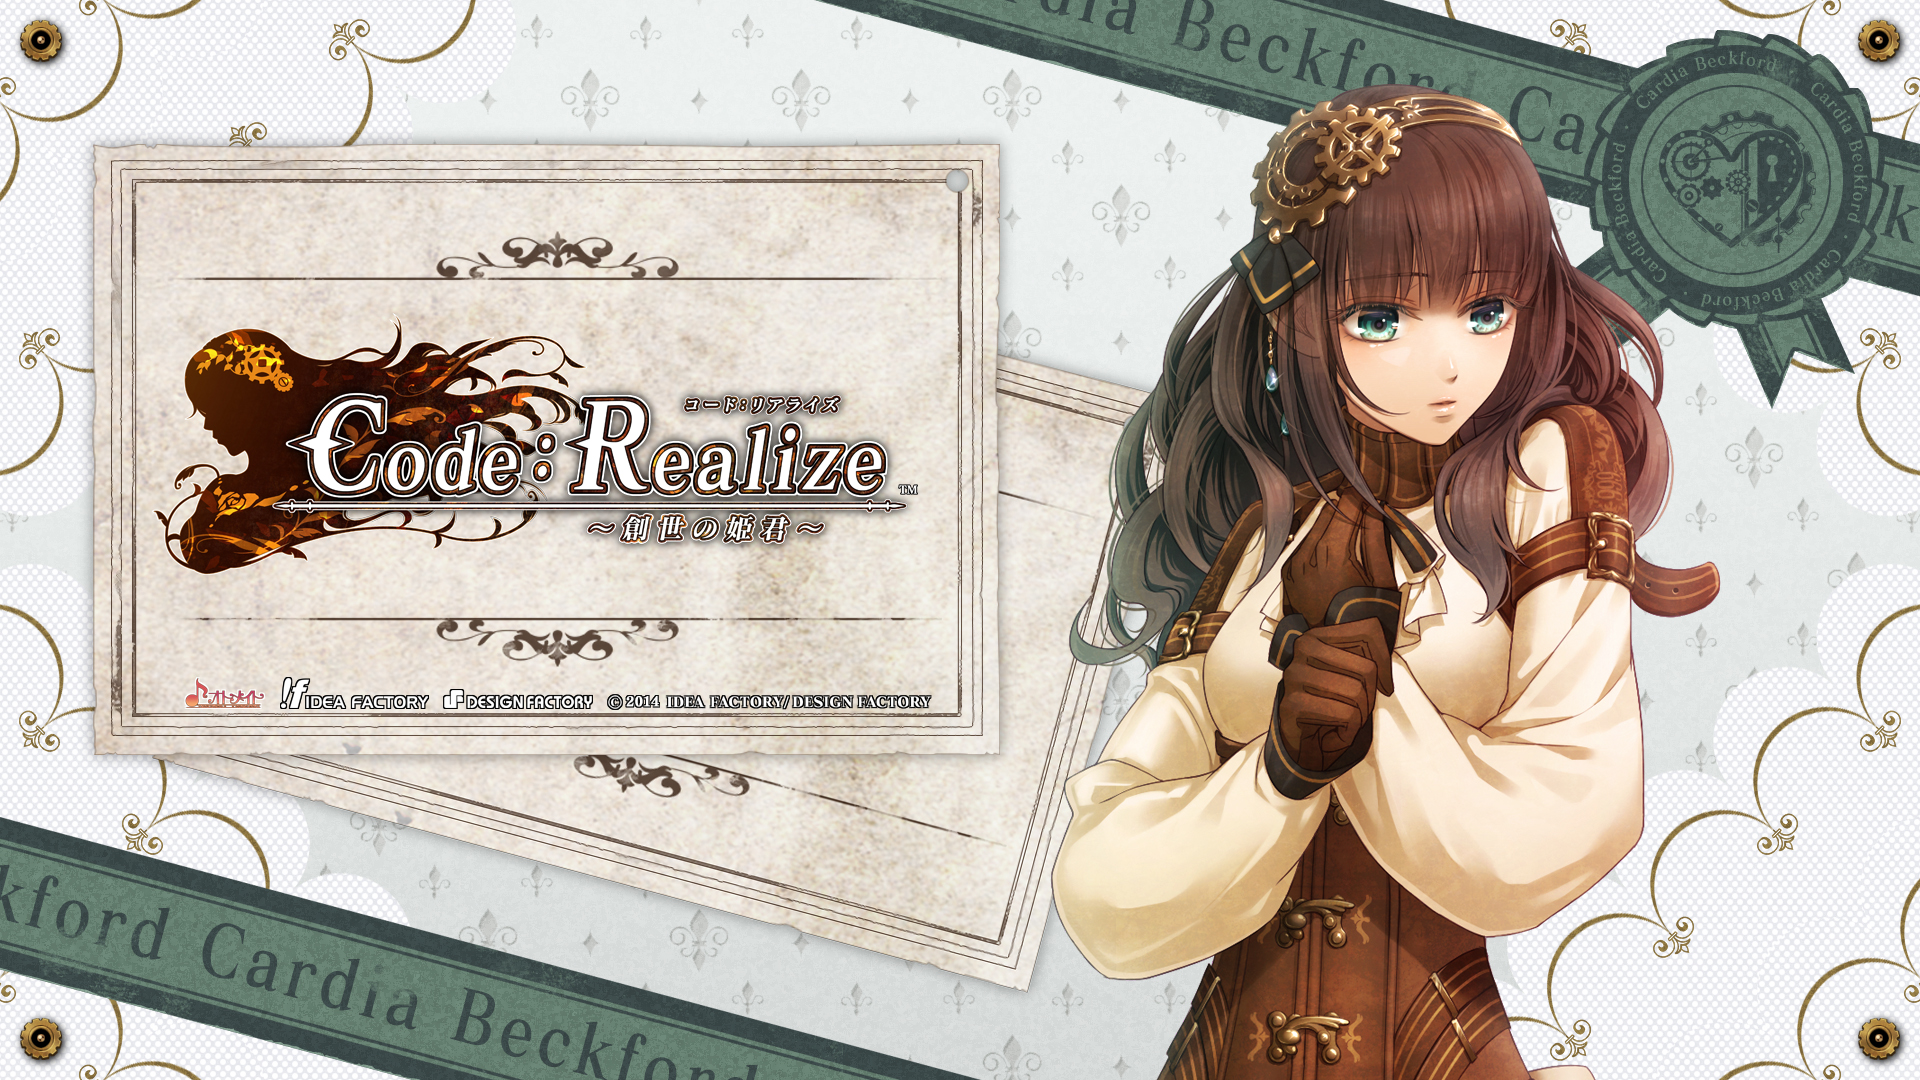 Video Game Code: Realize HD Wallpaper by miko